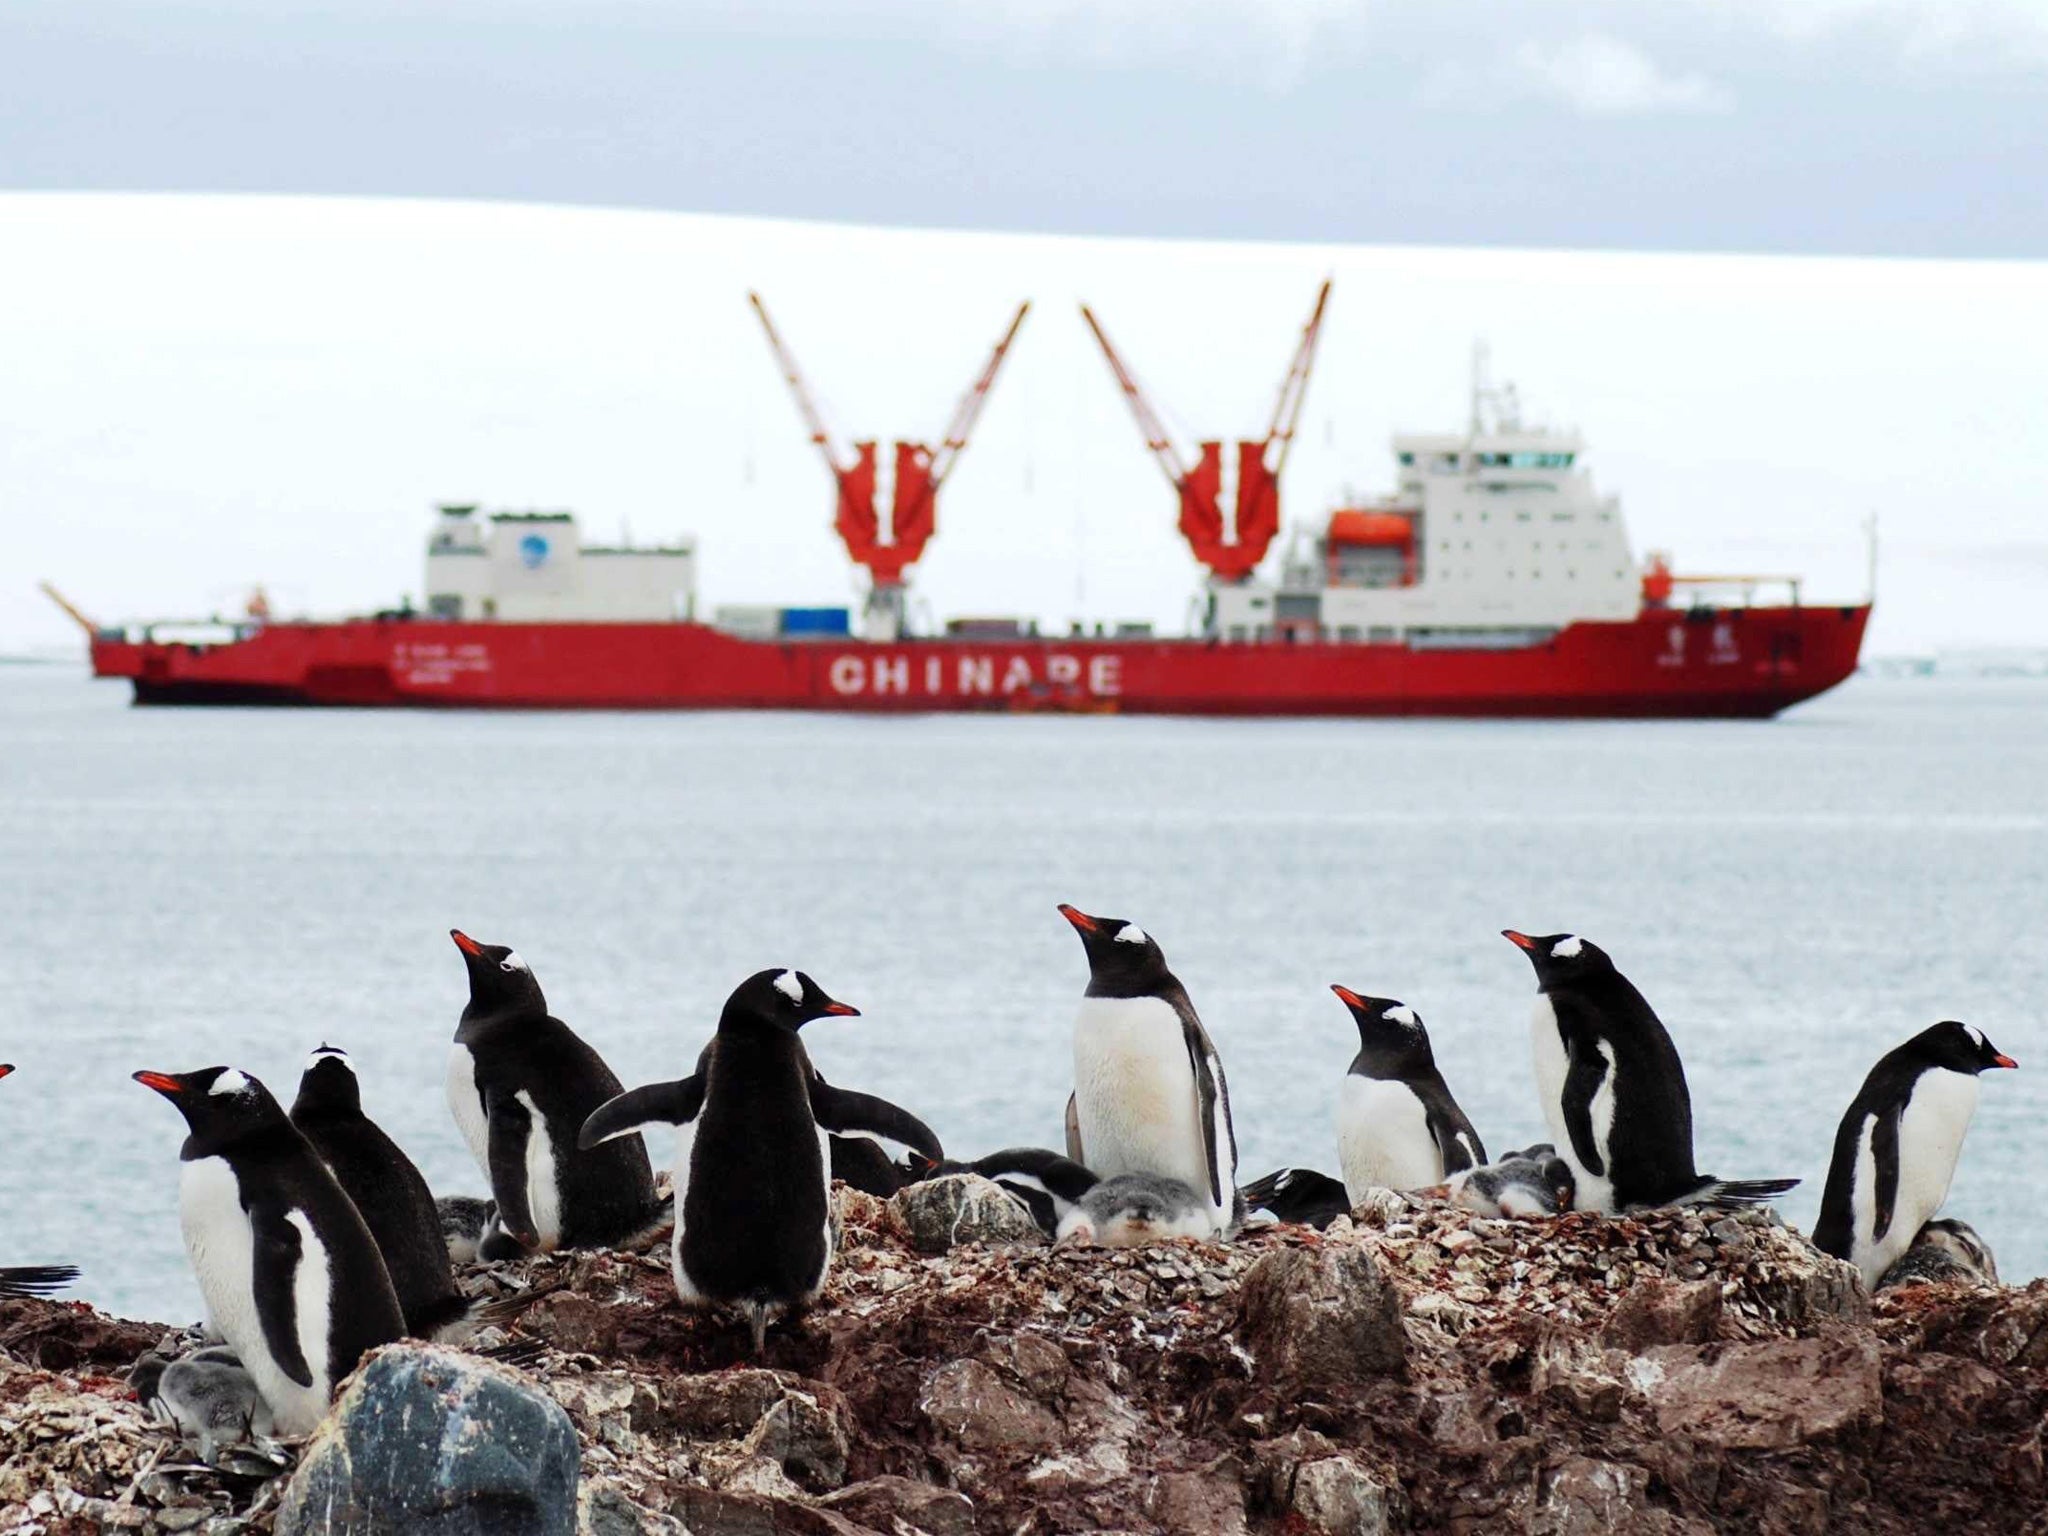 Gentoo penguins on an island near the Changcheng (Great Wall) Station, one of China's Antarctic research stations